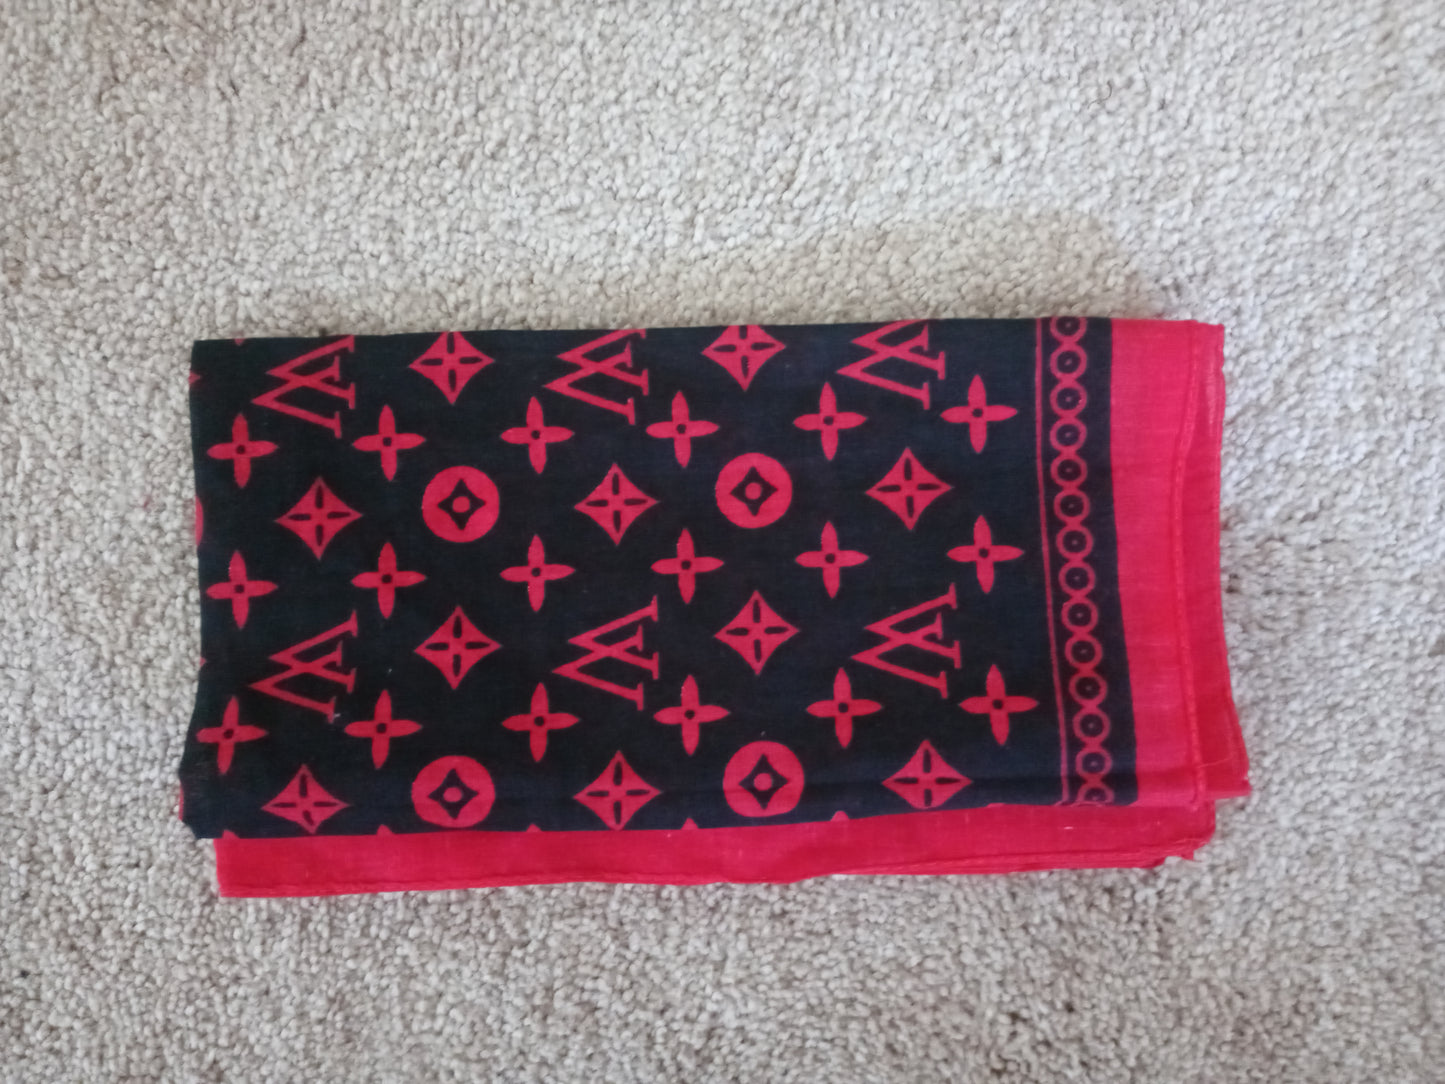 Women's Black & Red Scarf   Open Box - Never Used  No Tags